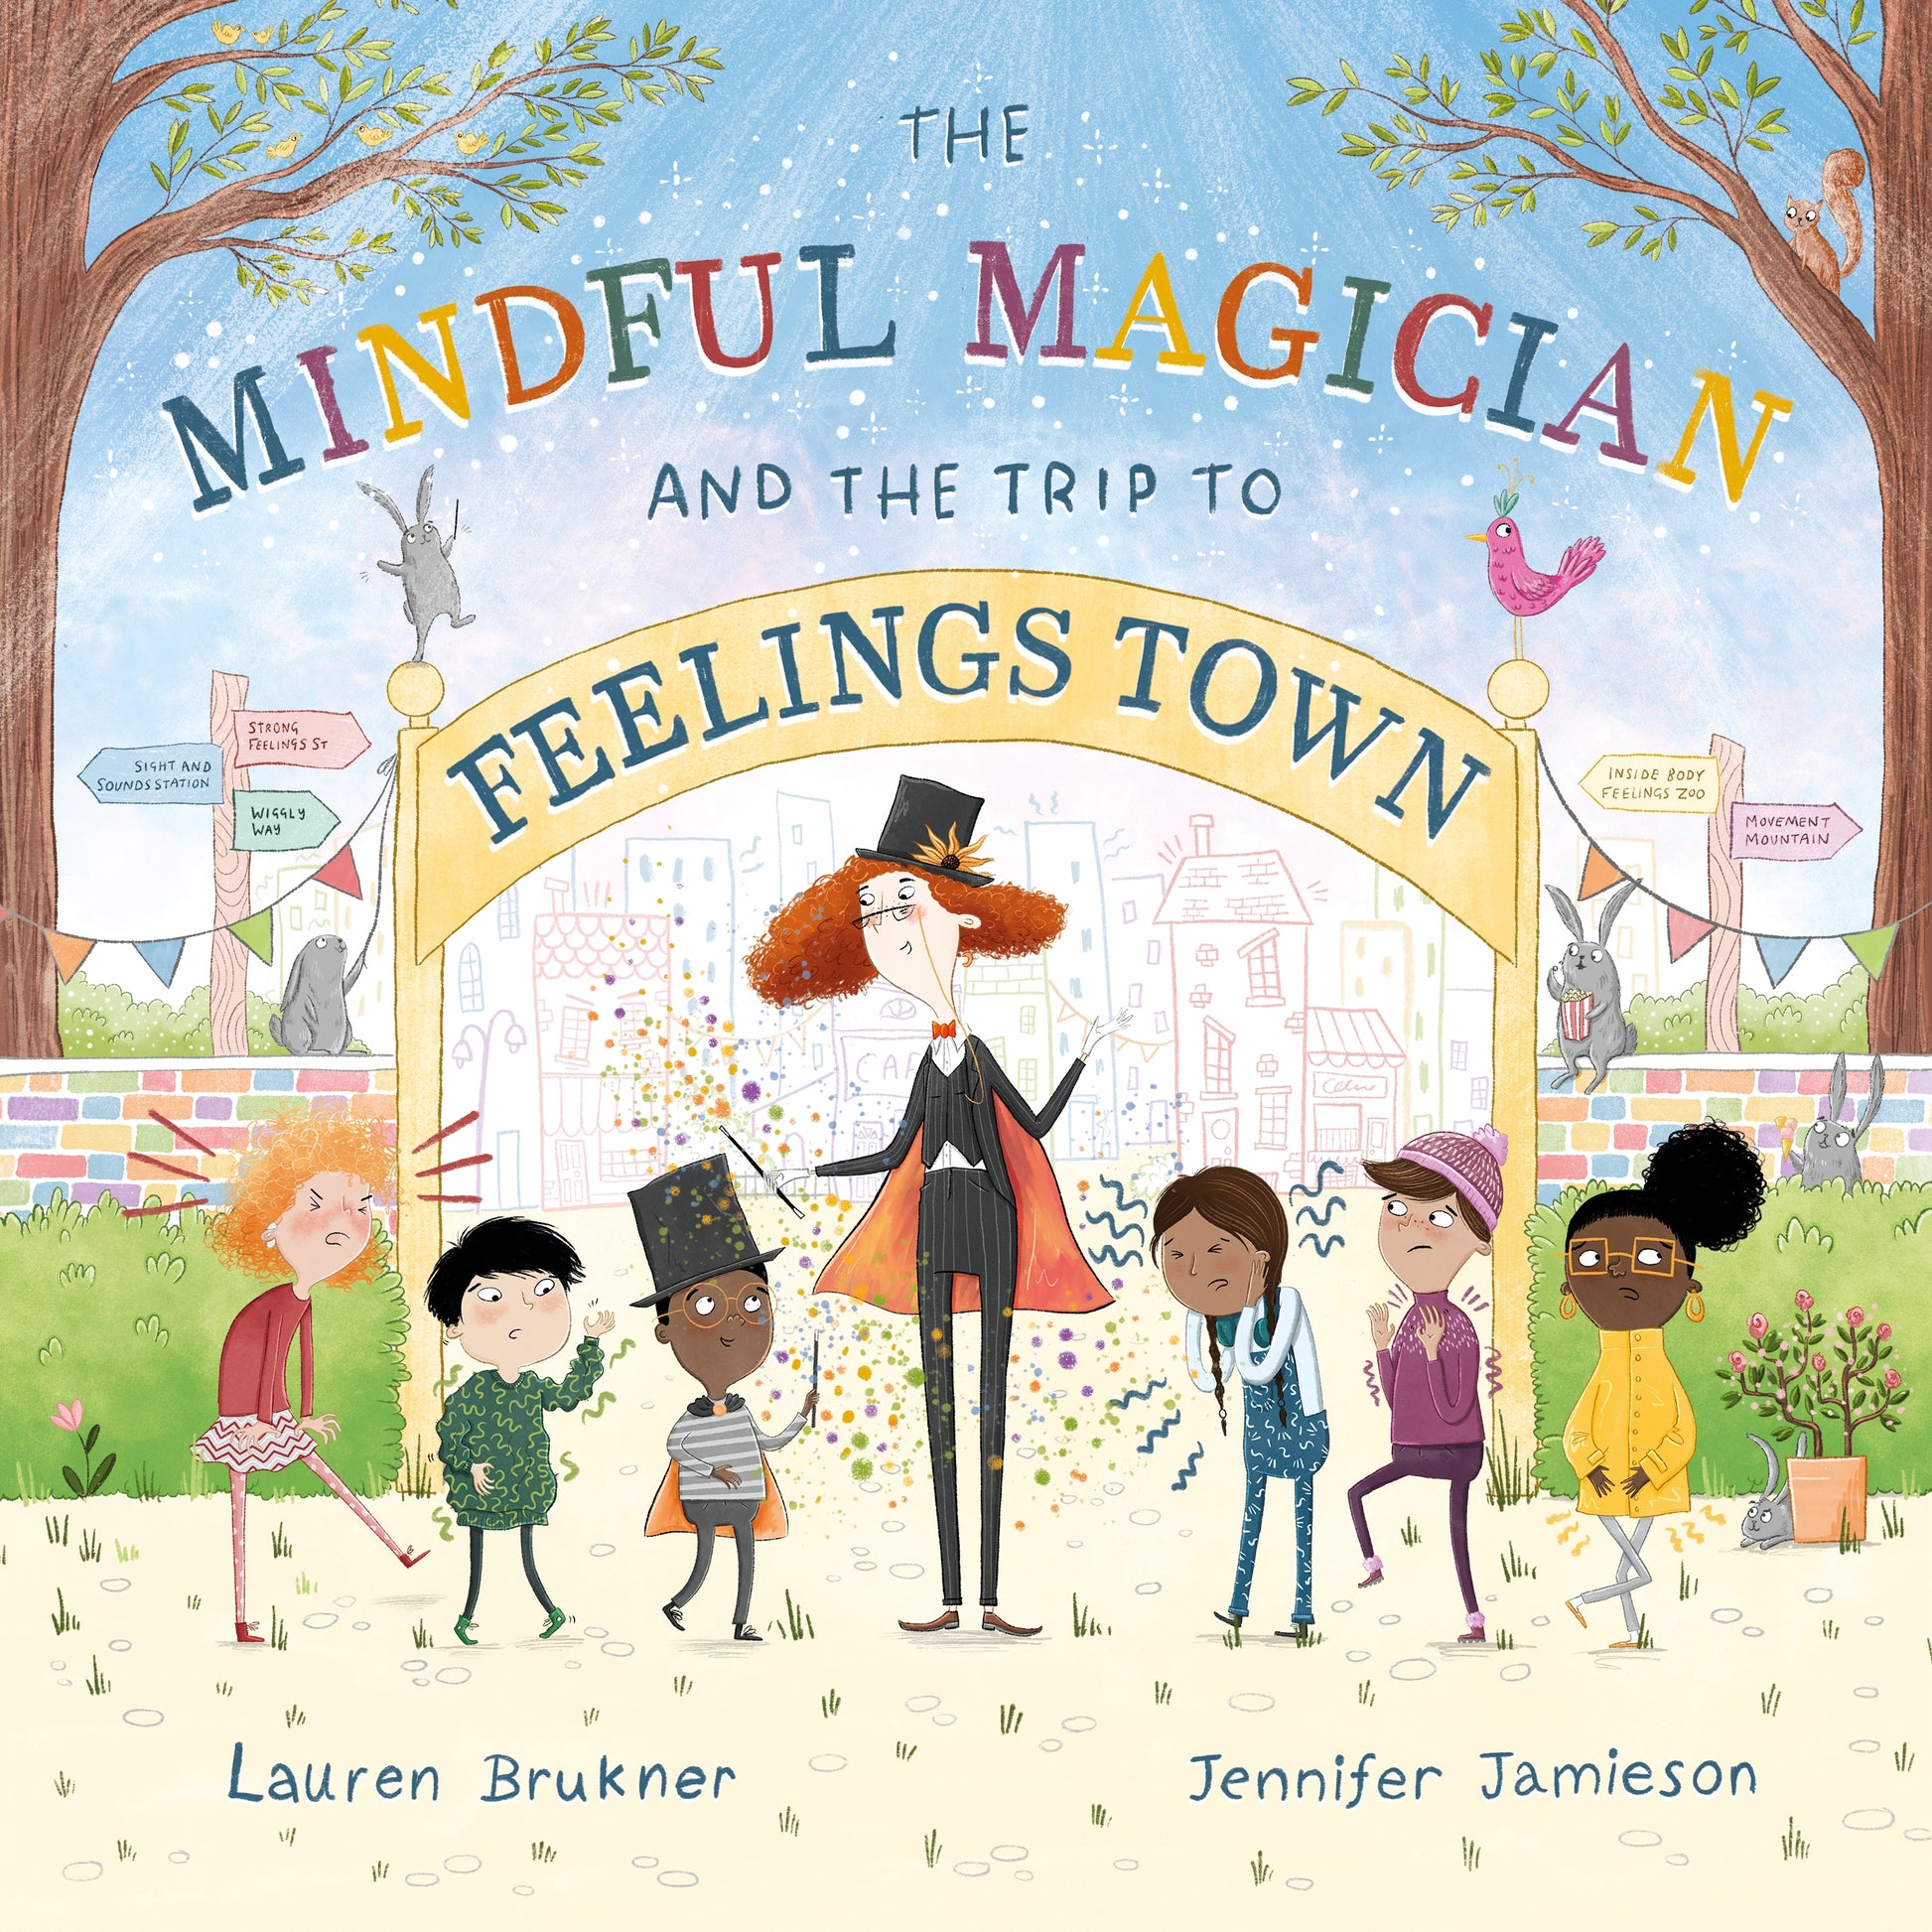 The Mindful Magician and the Trip to Feelings Town by Lauren Brukner